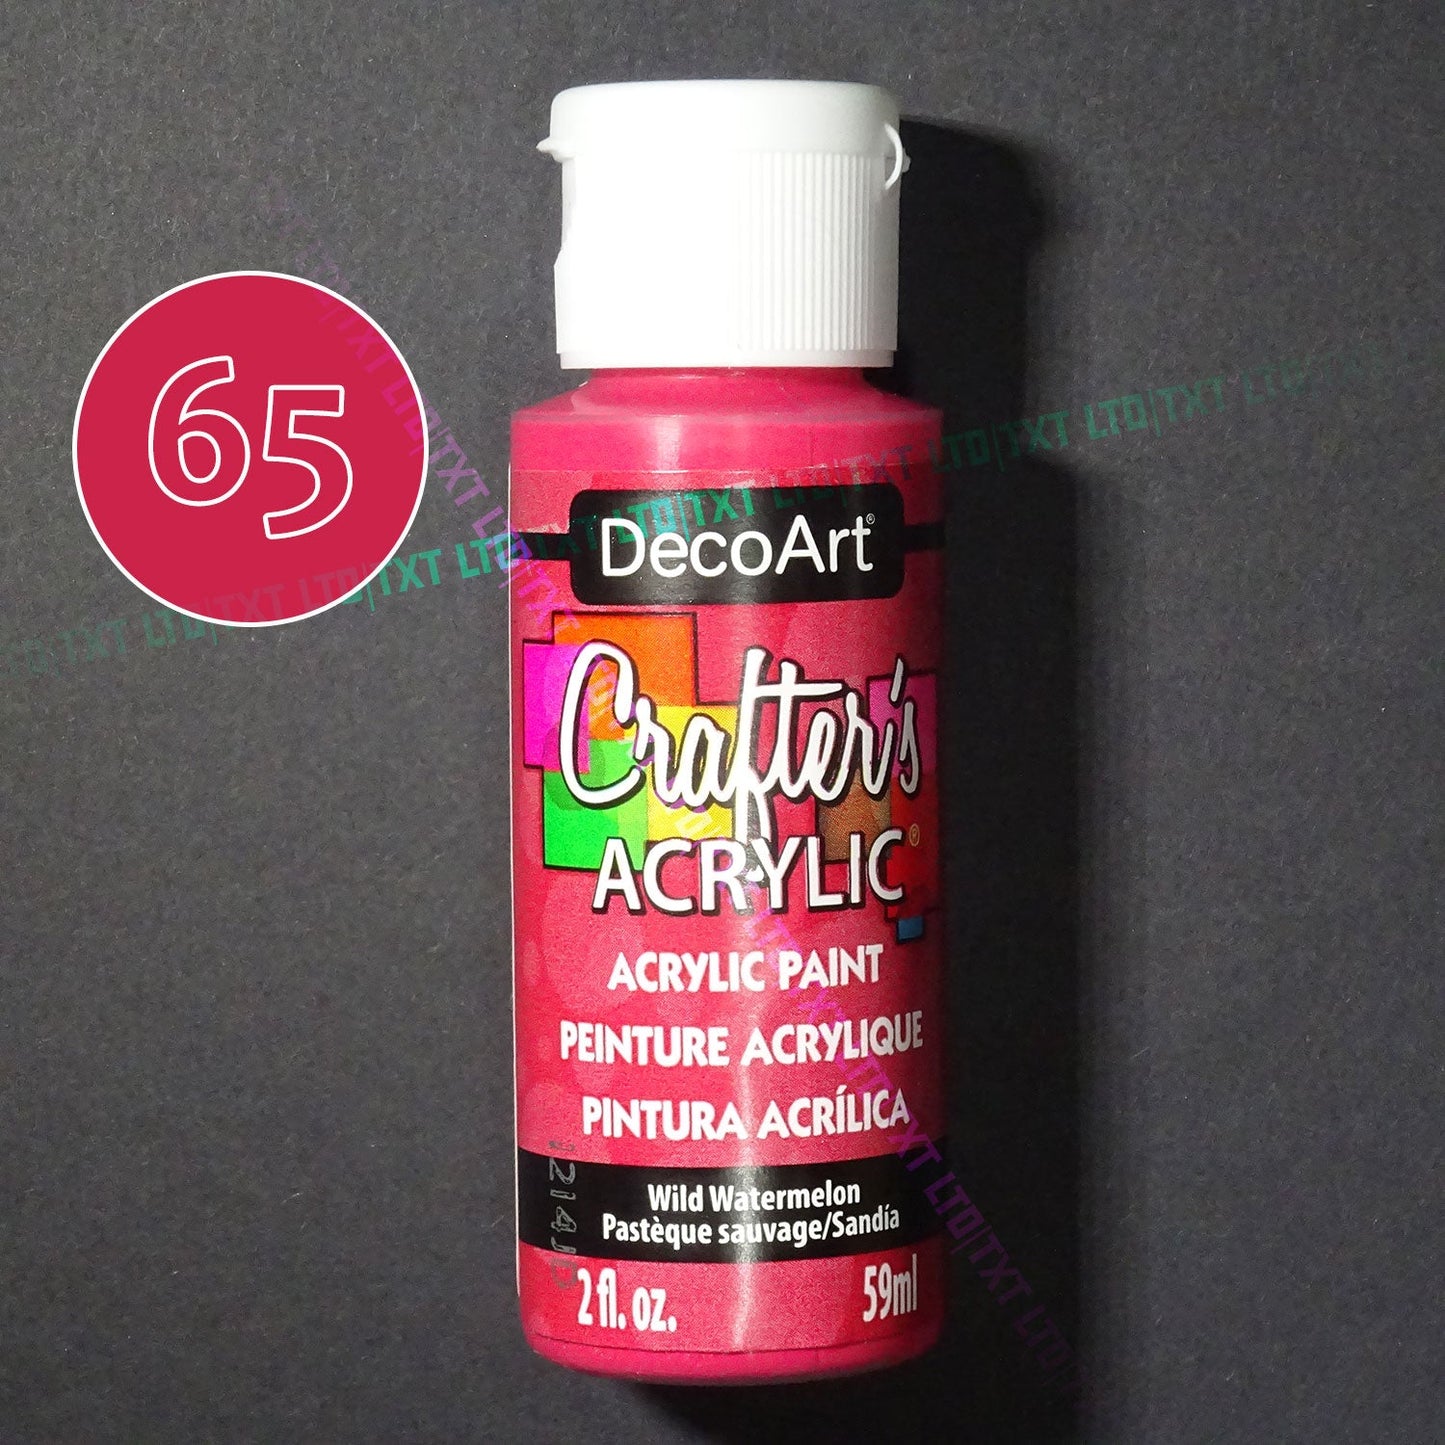 DecoArt Crafters Acrílico, 59ml/2oz. [colours 1 to 103]